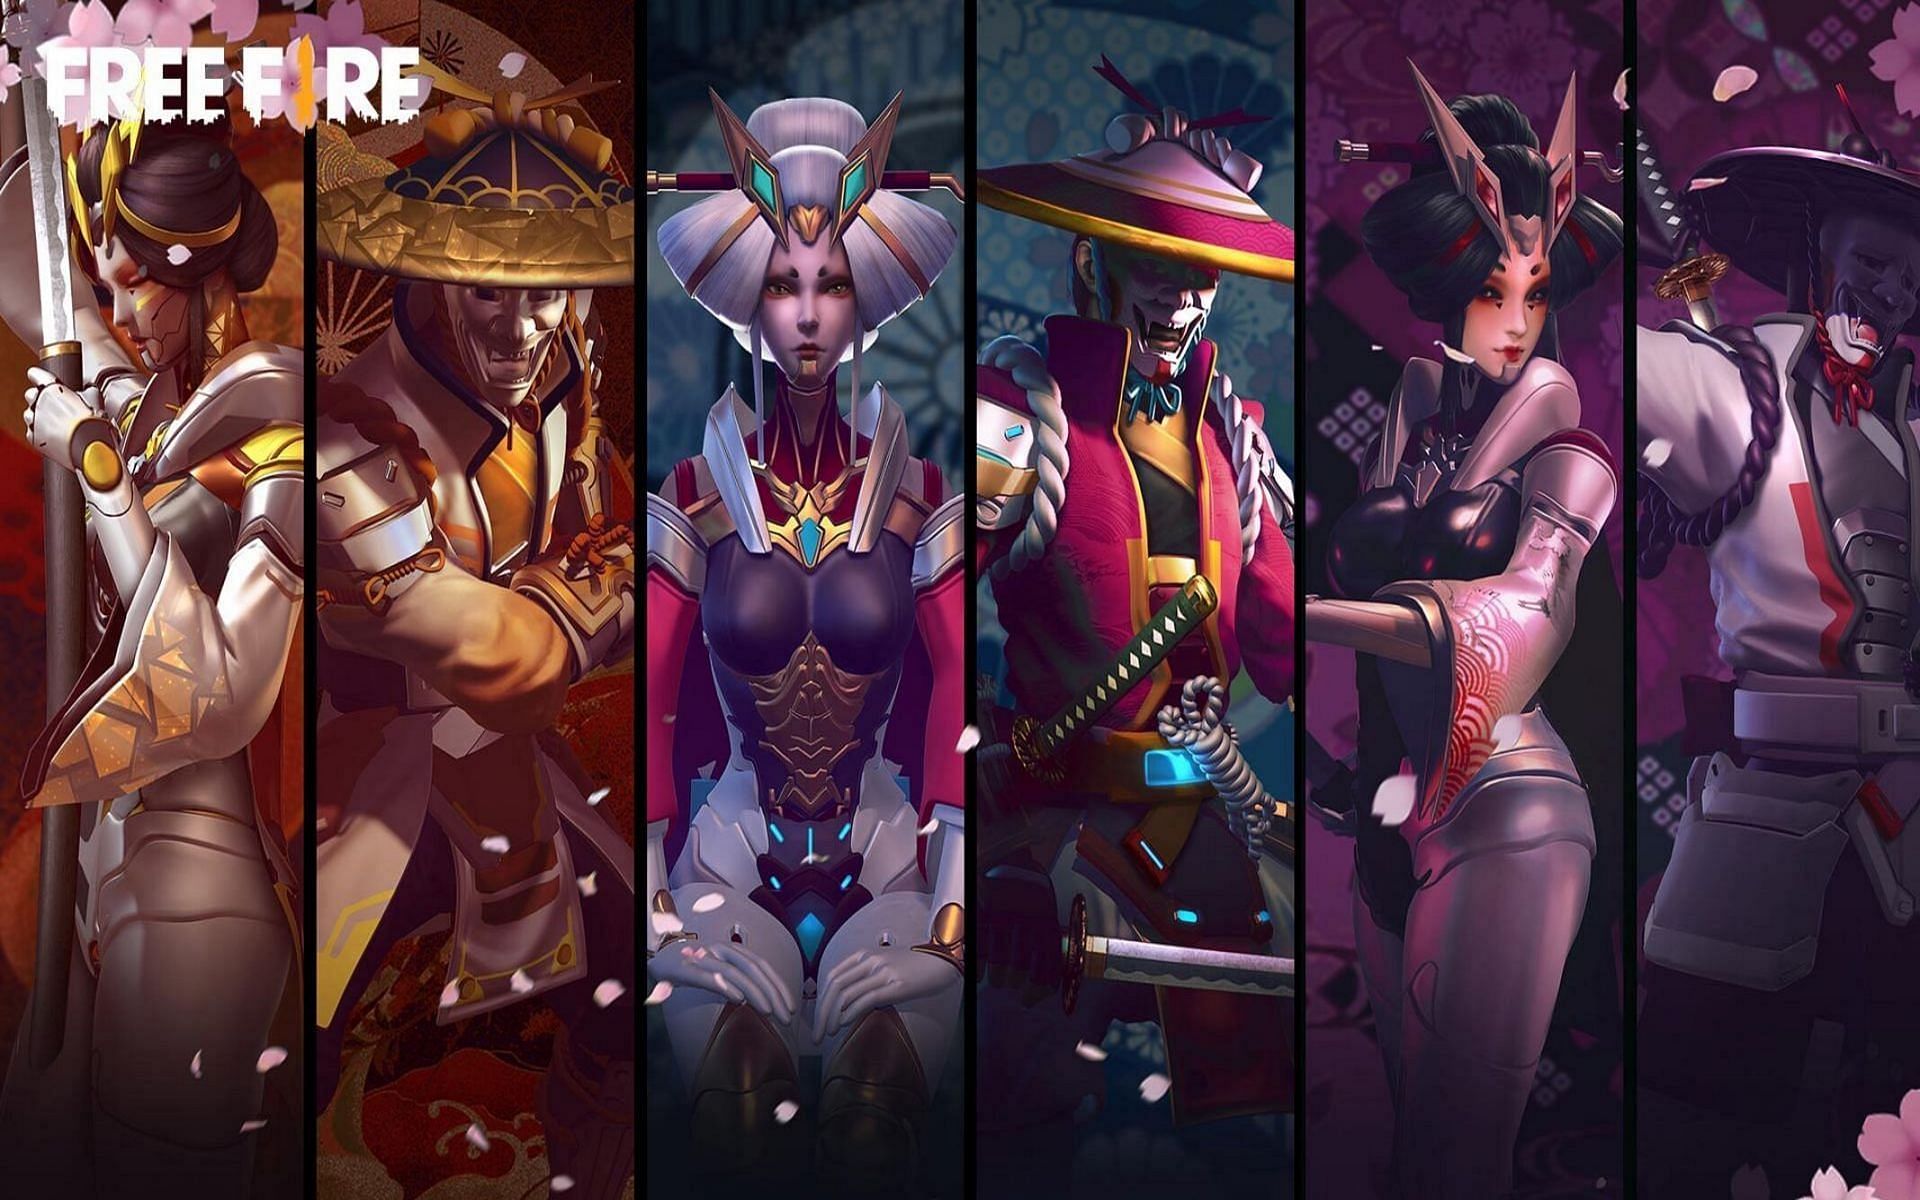 A look at some rarest outfit sets in Free Fire (Image via Garena)